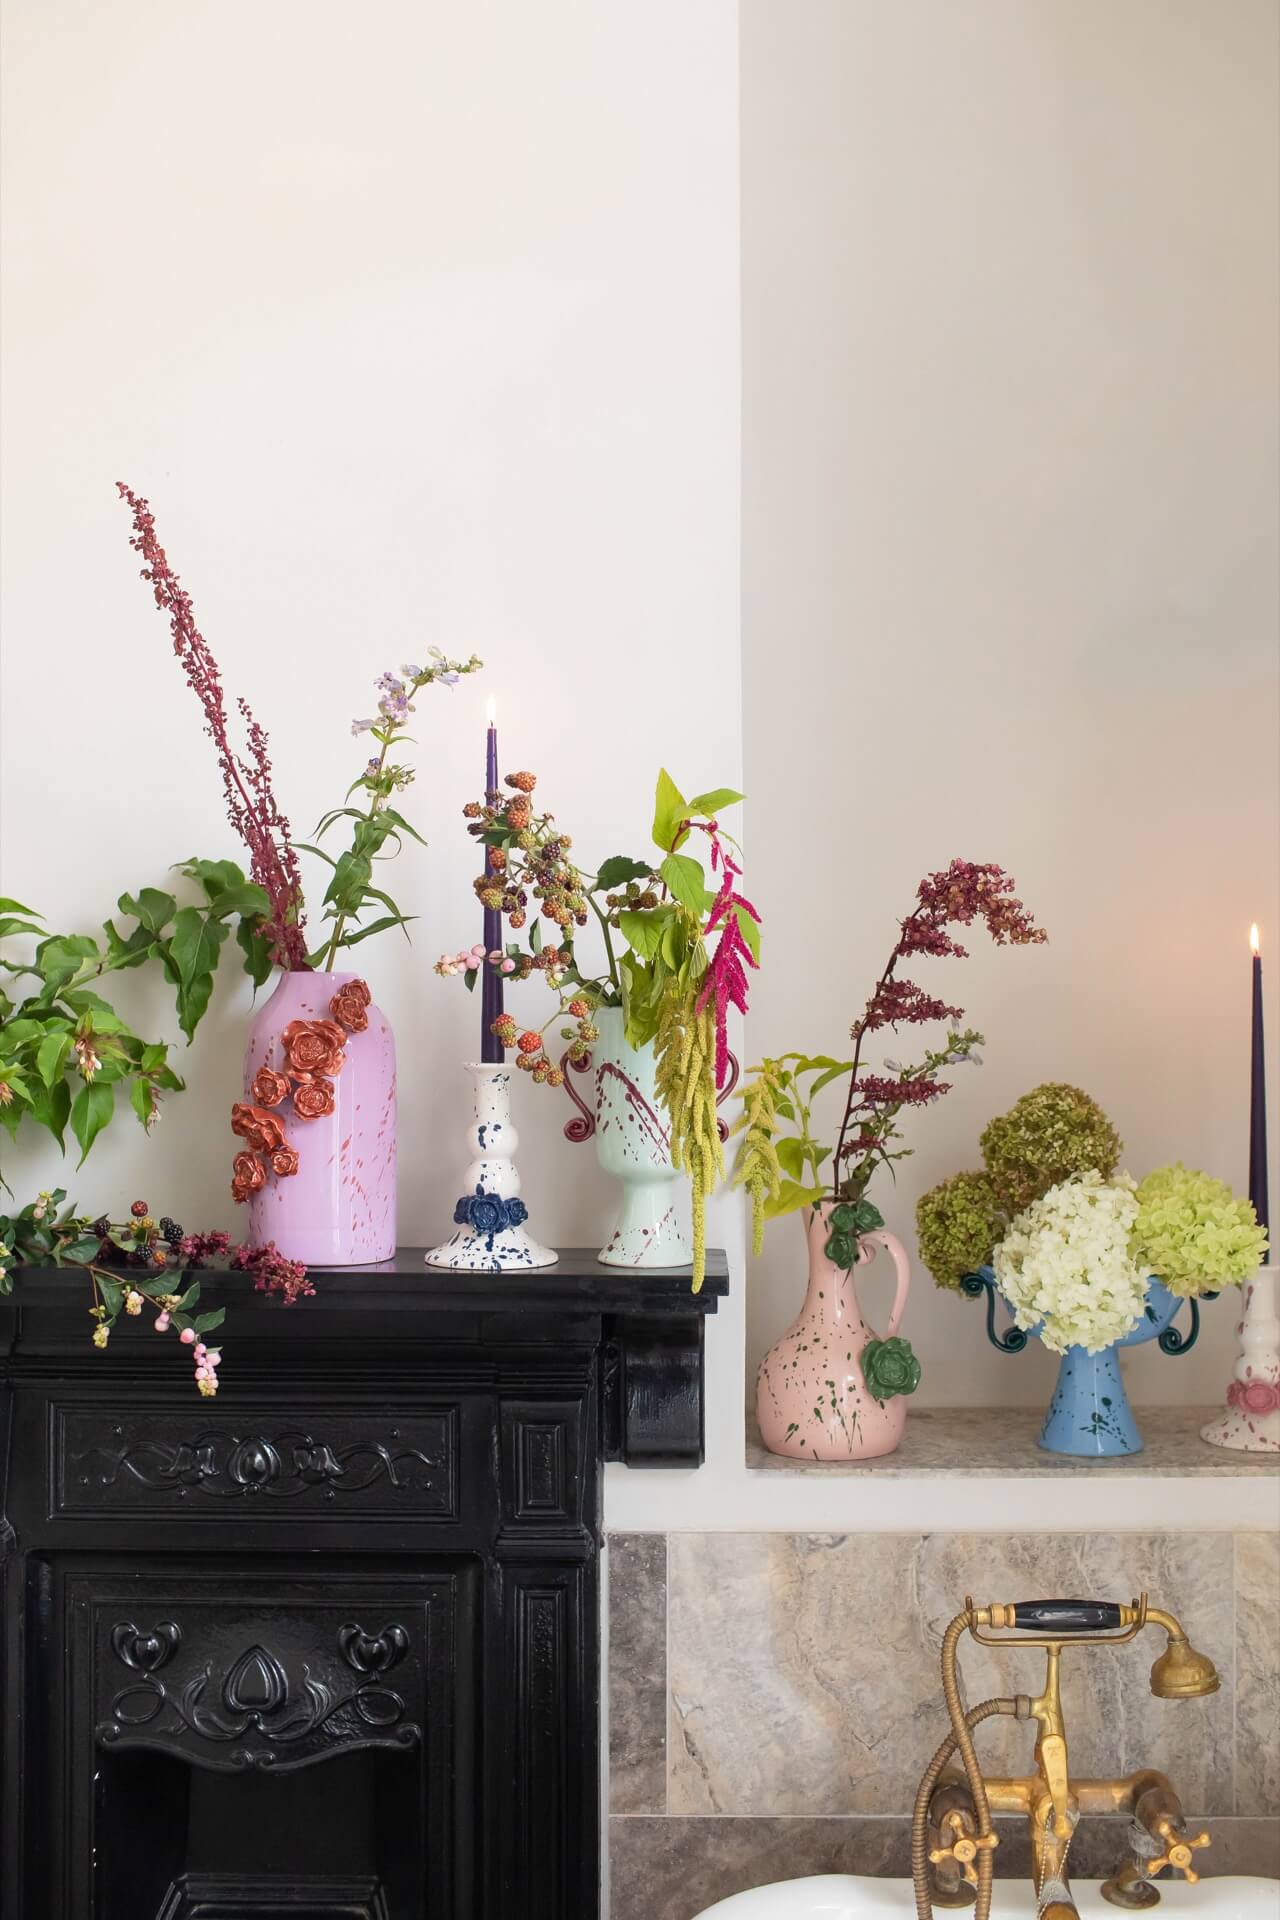 Colourful vintage antique style vases from independent UK contemporary homeware brand Vaisselle